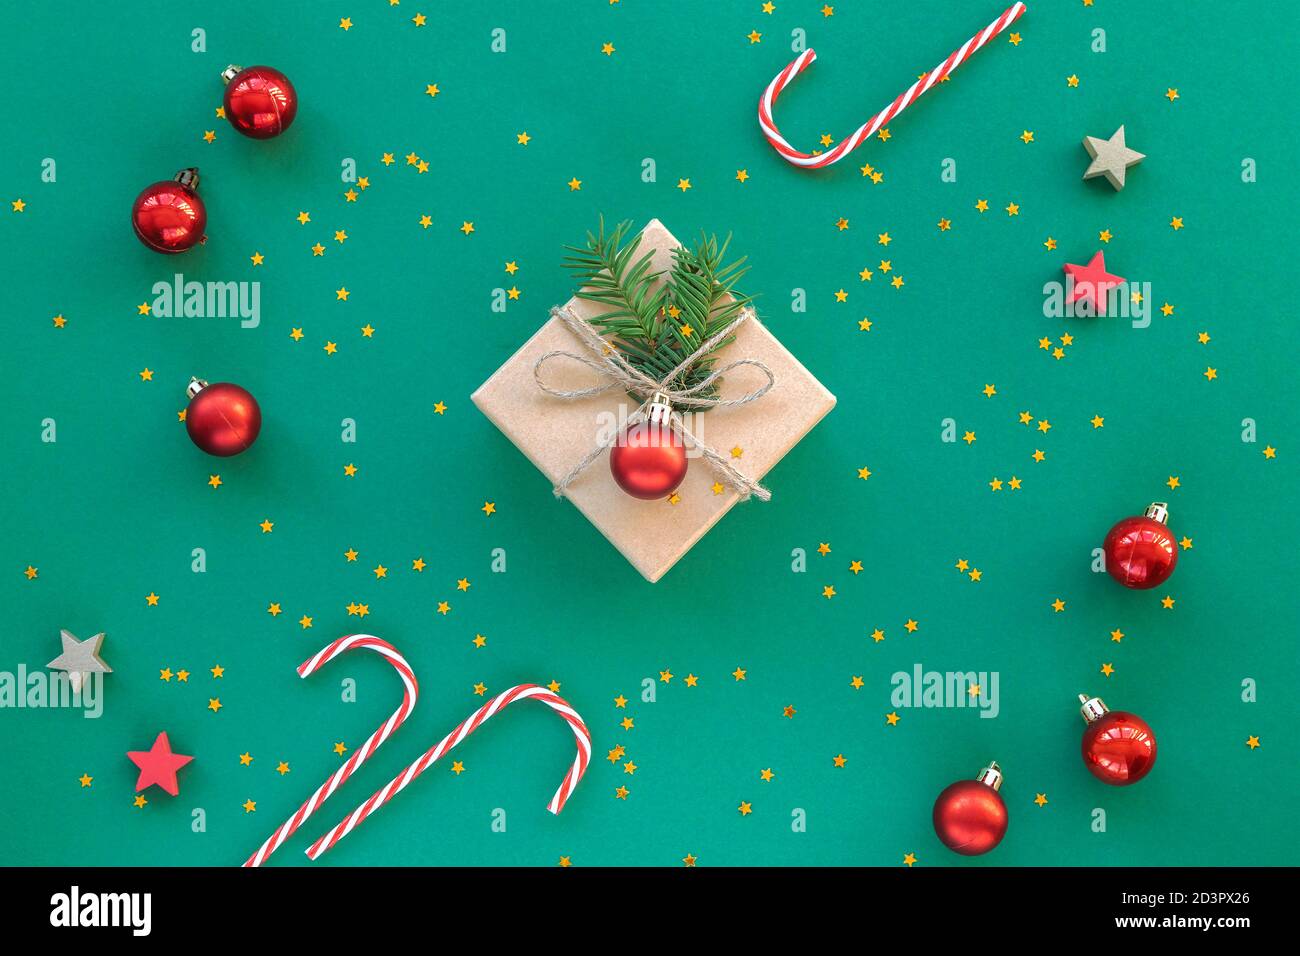 Christmas gift in a box with confetti and red baubles on green background. New year concept. Top view, flat lay, copy space. Stock Photo